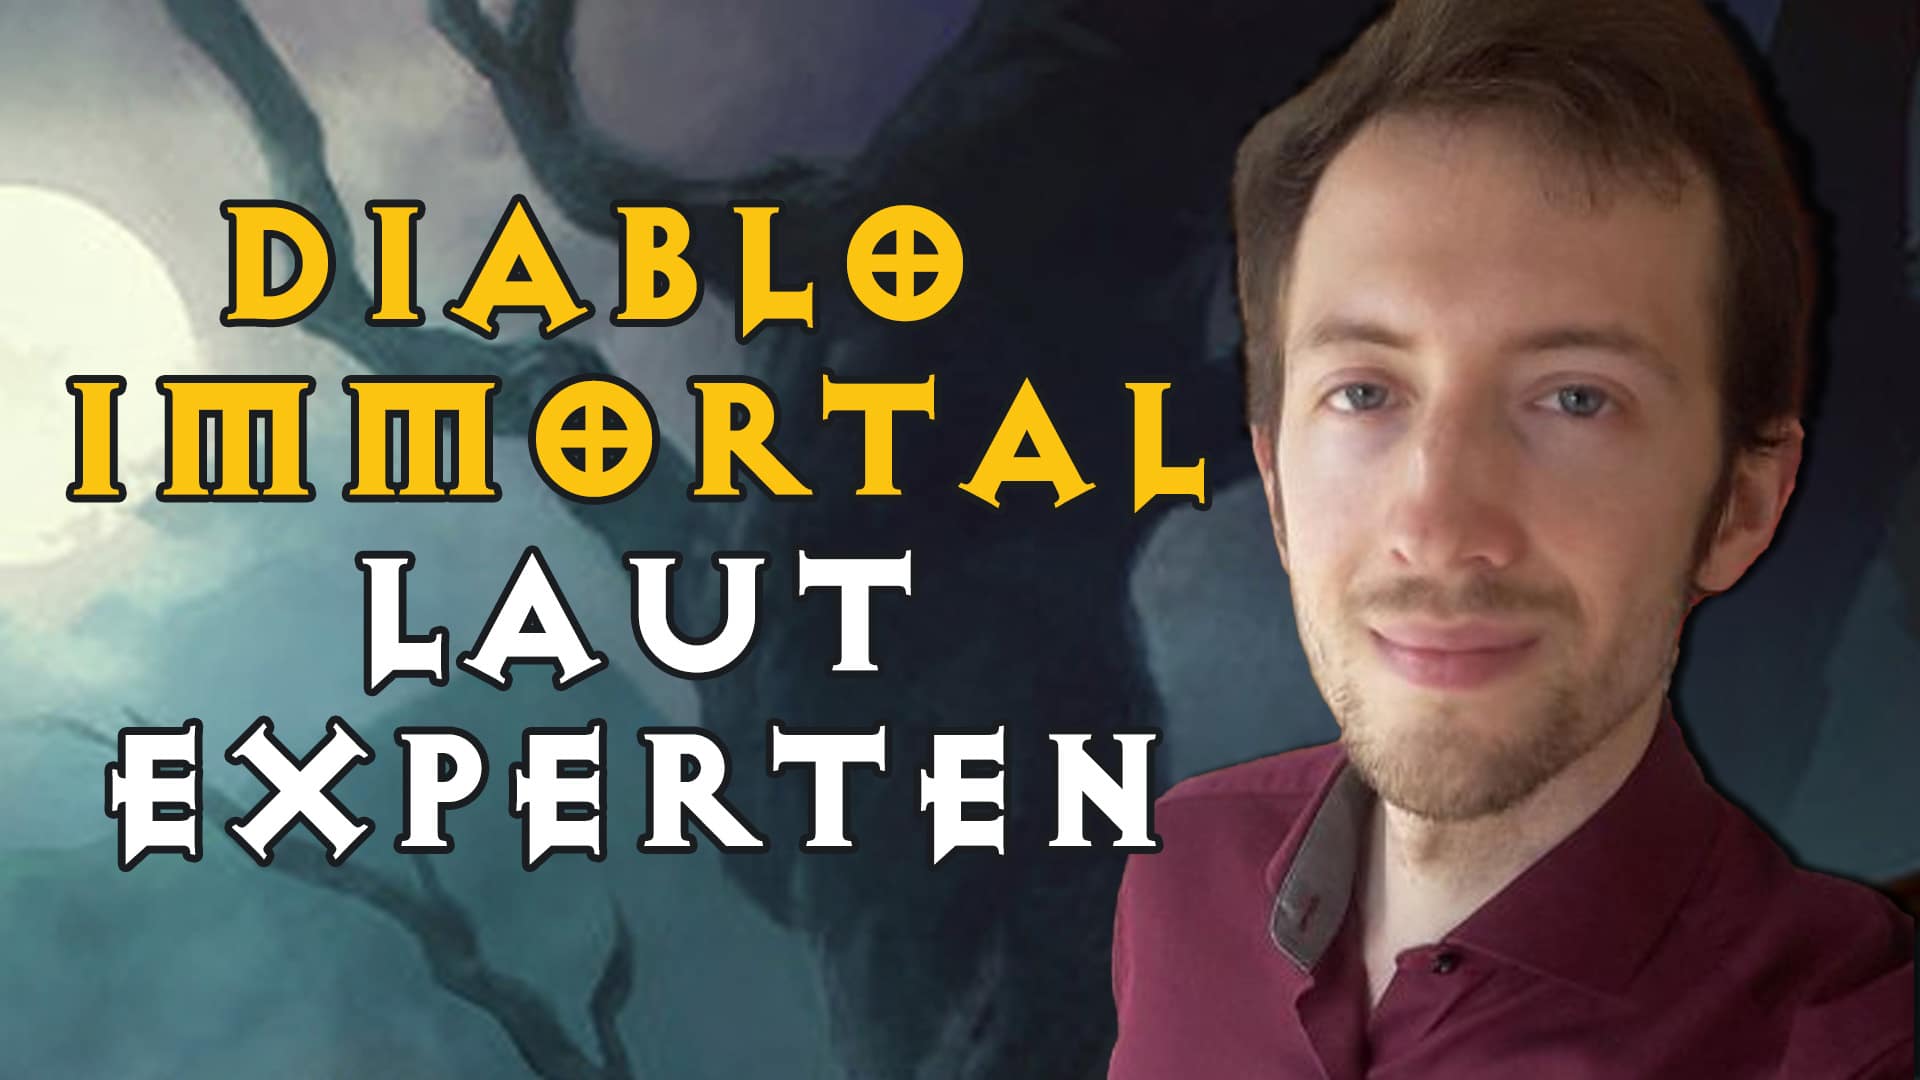 German expert says: "Diablo Immortal is incredibly good and one of the best mobile games, but..."